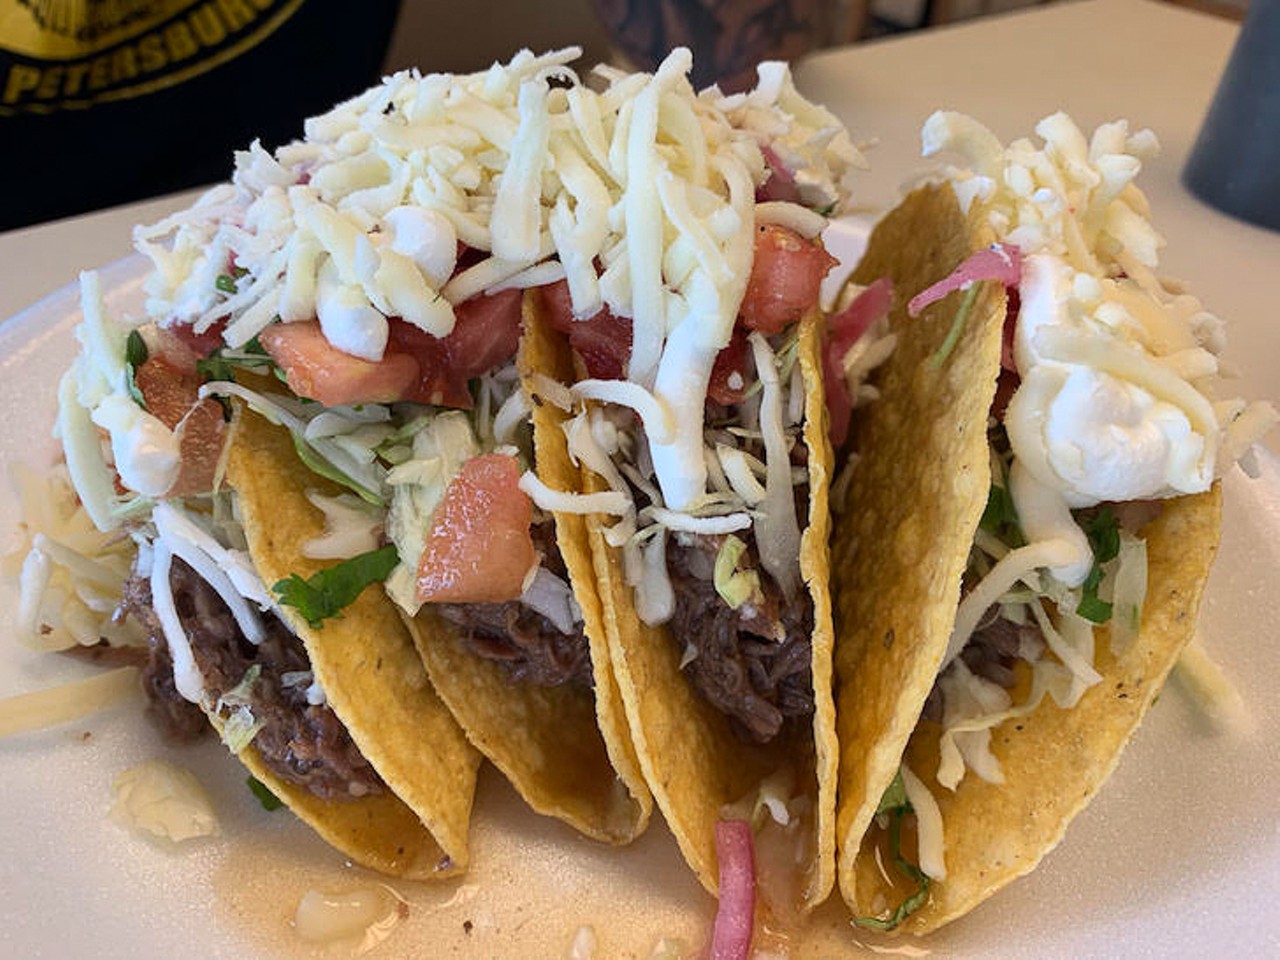 TacoSon
Multiple locations,
TacoSon Facebook  
Takeout with online ordering. The drive-thru is open in at Temple Terrace location. Tacos, tres leches, tostadas and more.
Photo via CL Tampa